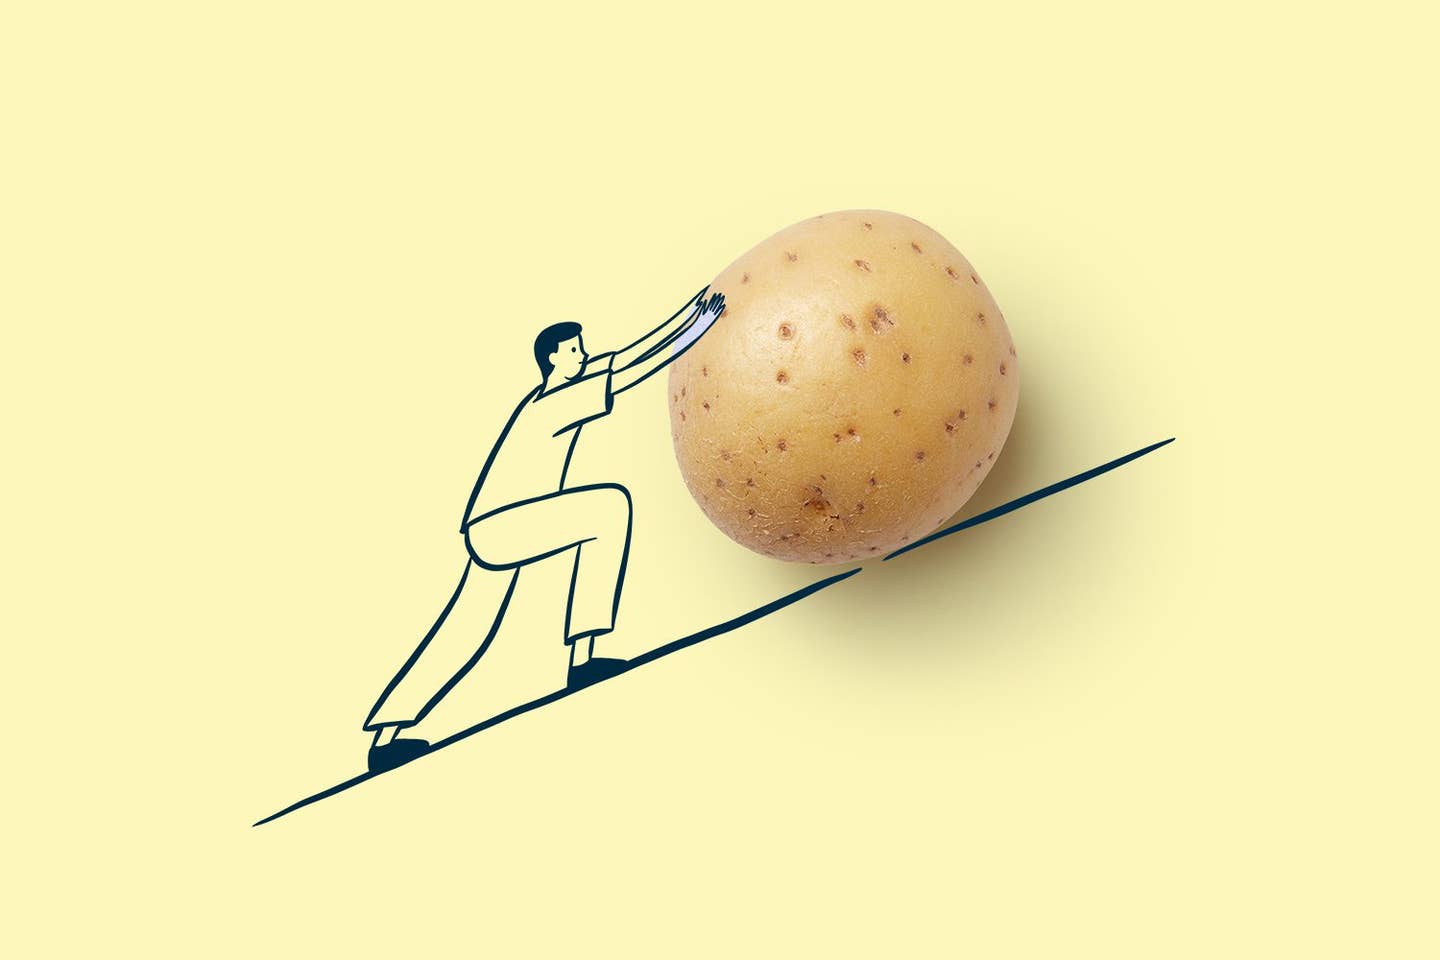 A mixed-media piece in which a simple illustration of a man appears to push a real potato up an illustrated hill